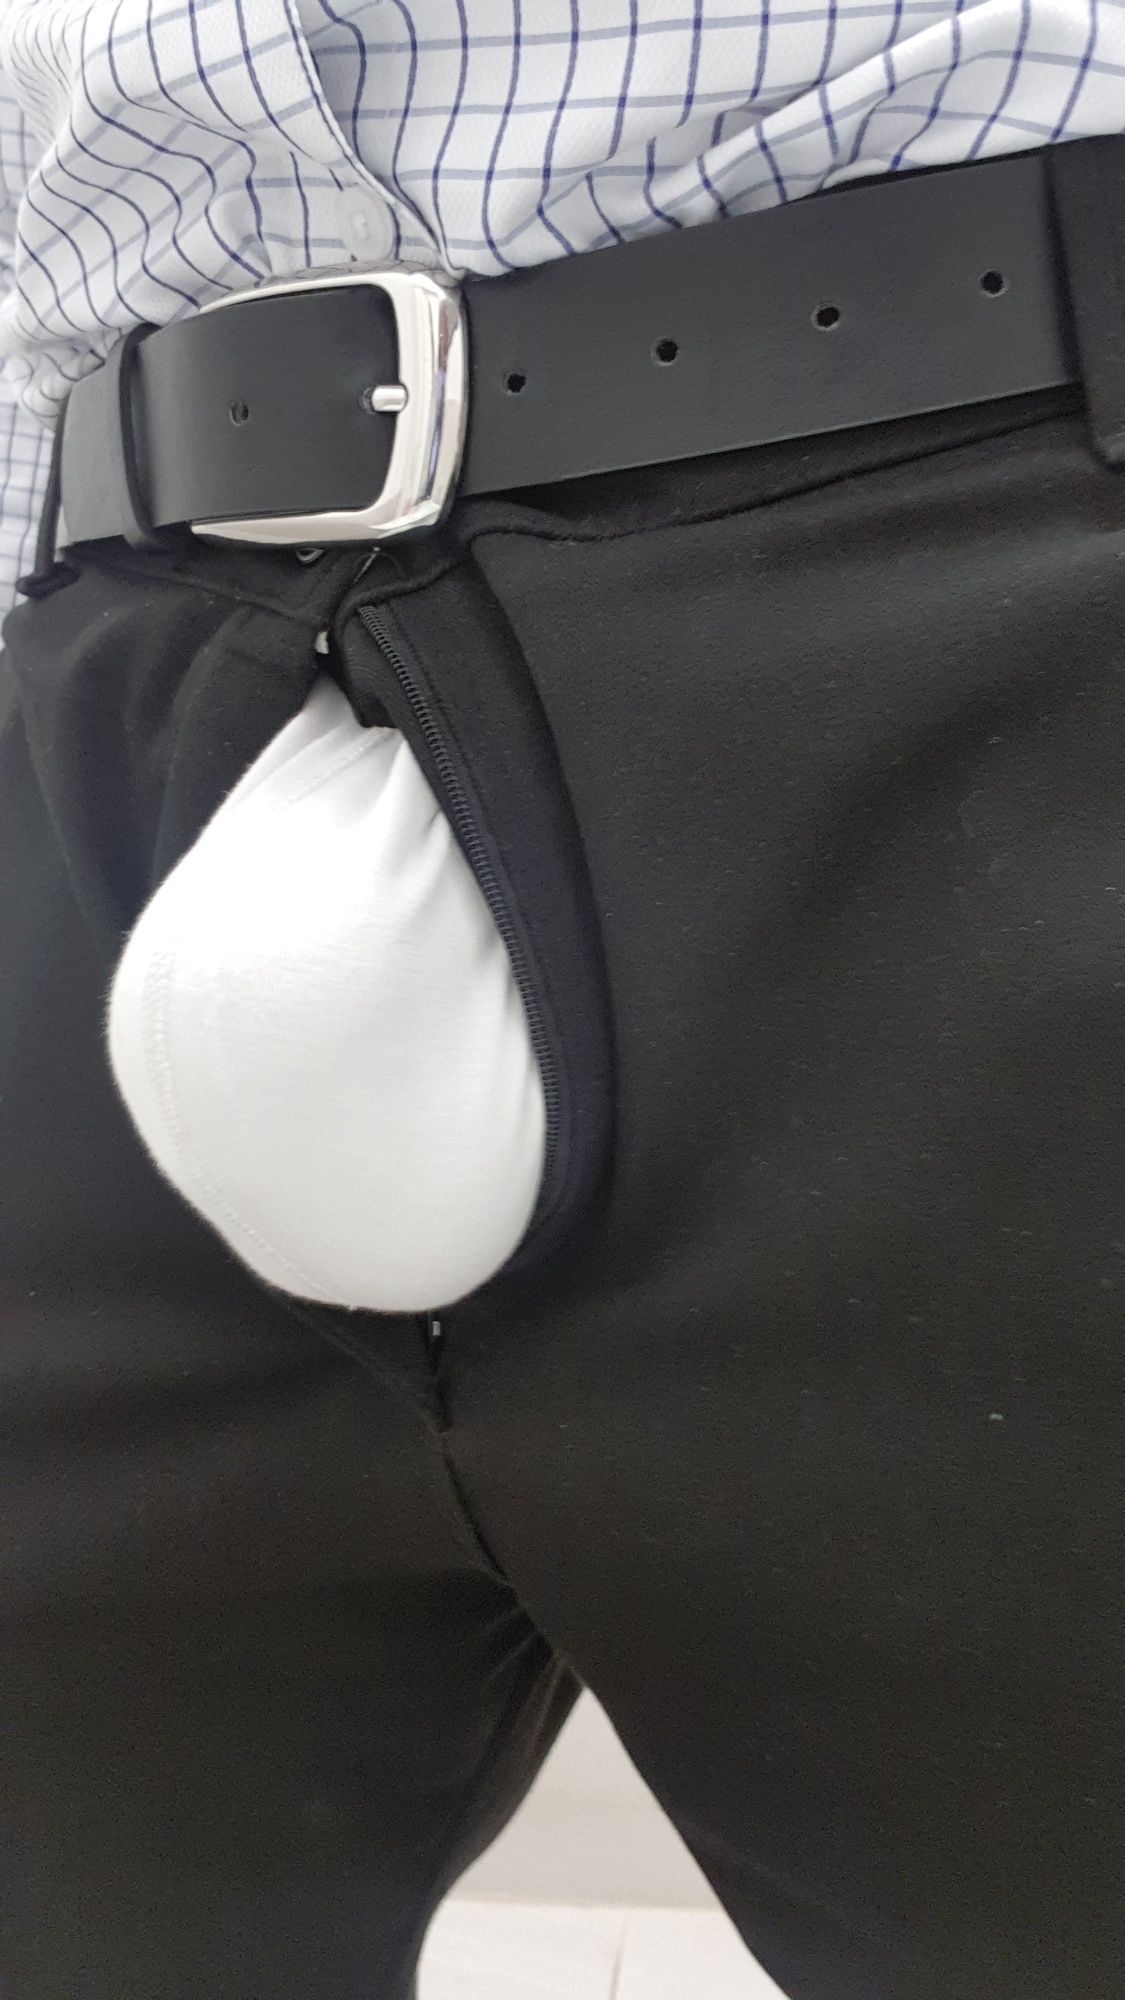 Had to let my cock out to breathe in the office toilet #2